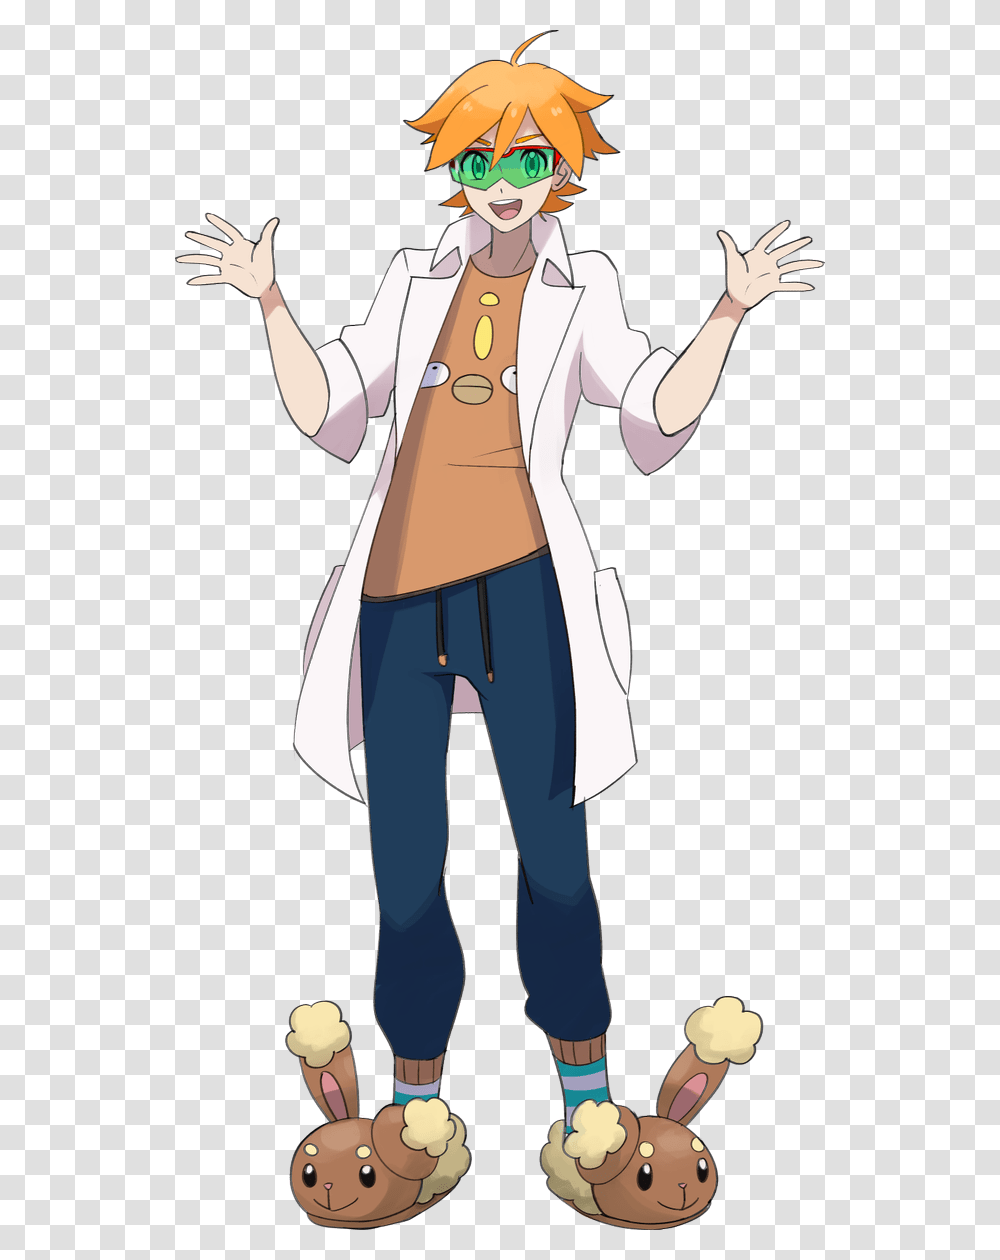 Male Pokemon Trainer Oc, Person, Doctor, Lab Coat Transparent Png